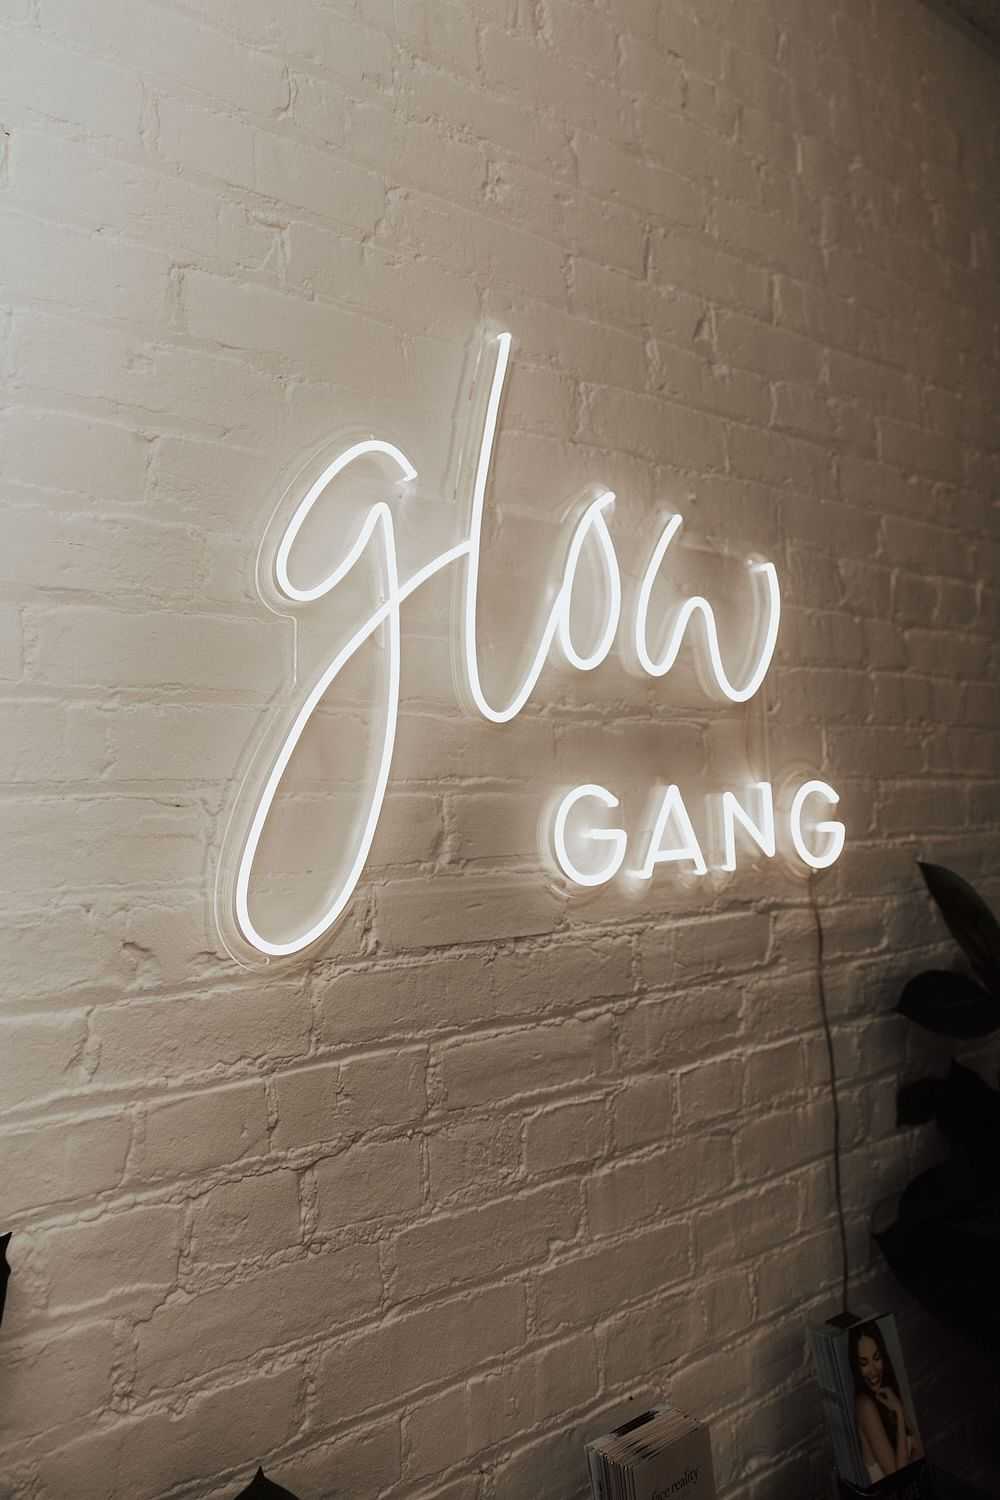 Neon sign on a brick wall reading 'Glow Gang'.